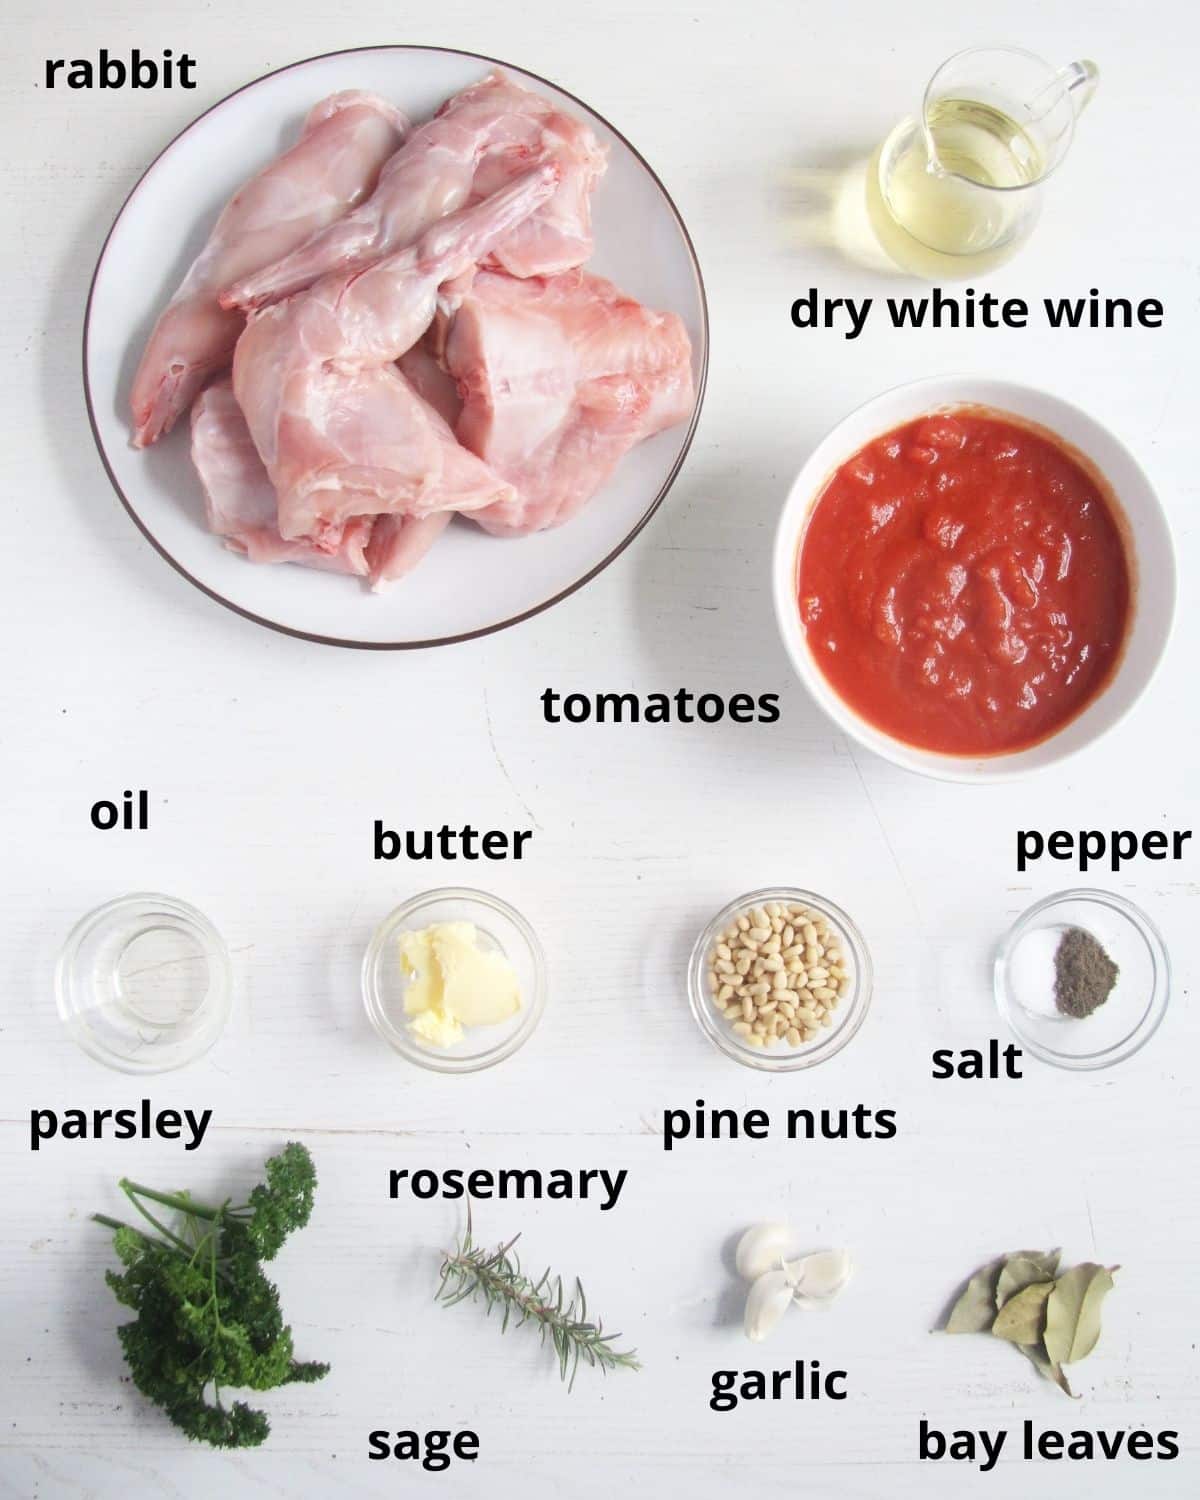 listed ingredients for making stew with rabbit, tomatoes and wine.